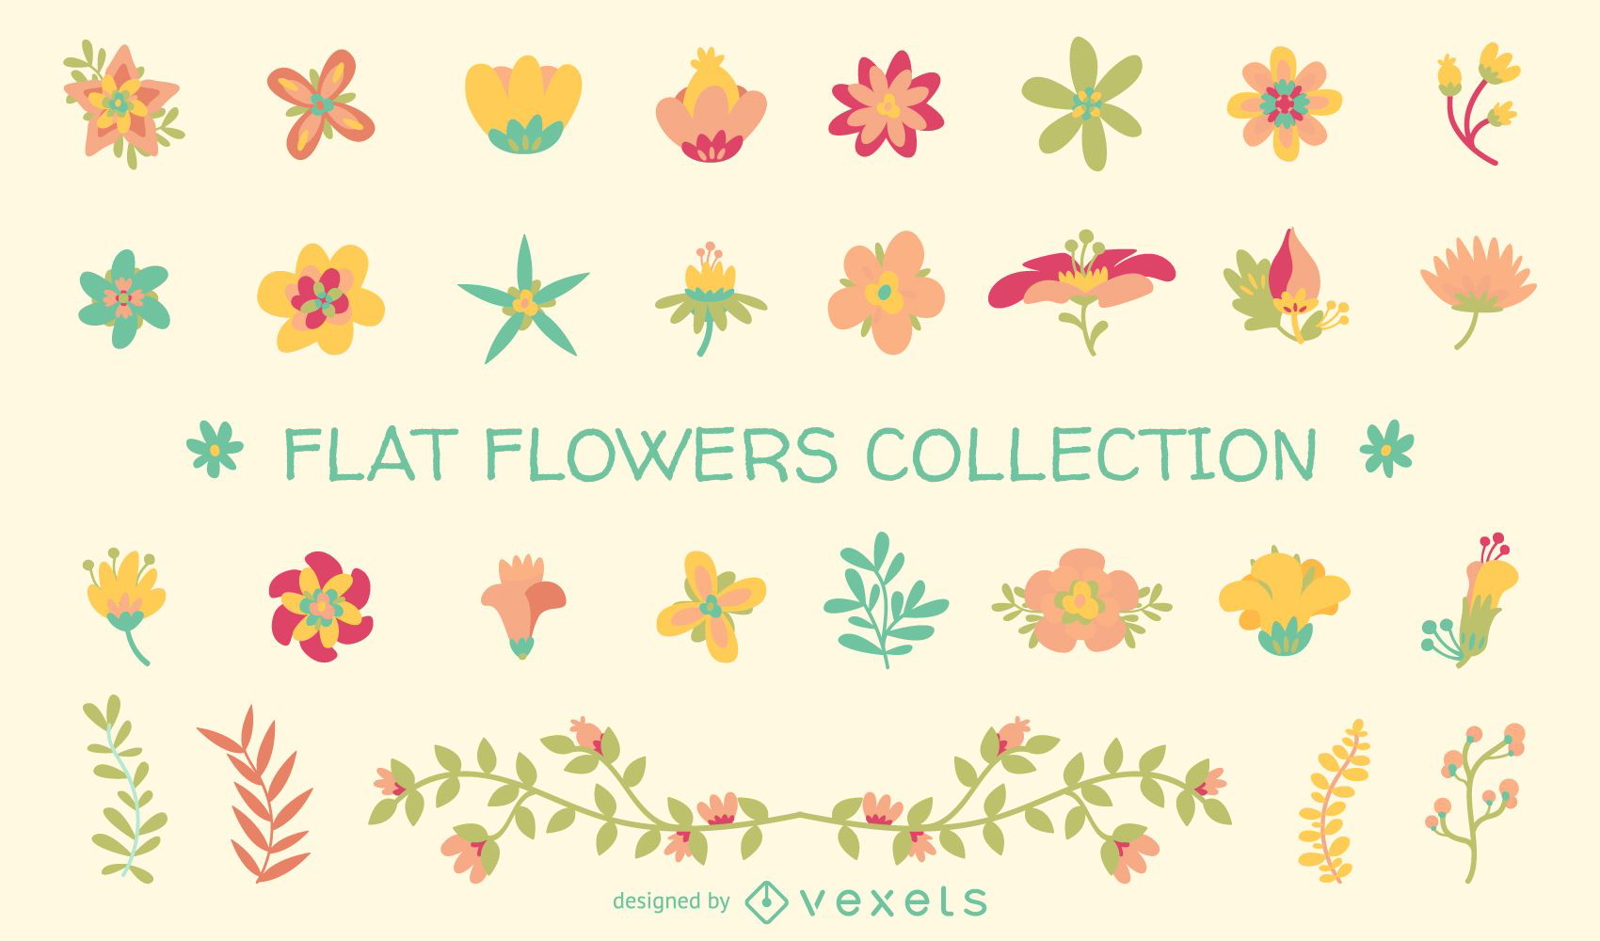 Collection of flat flower illustrations